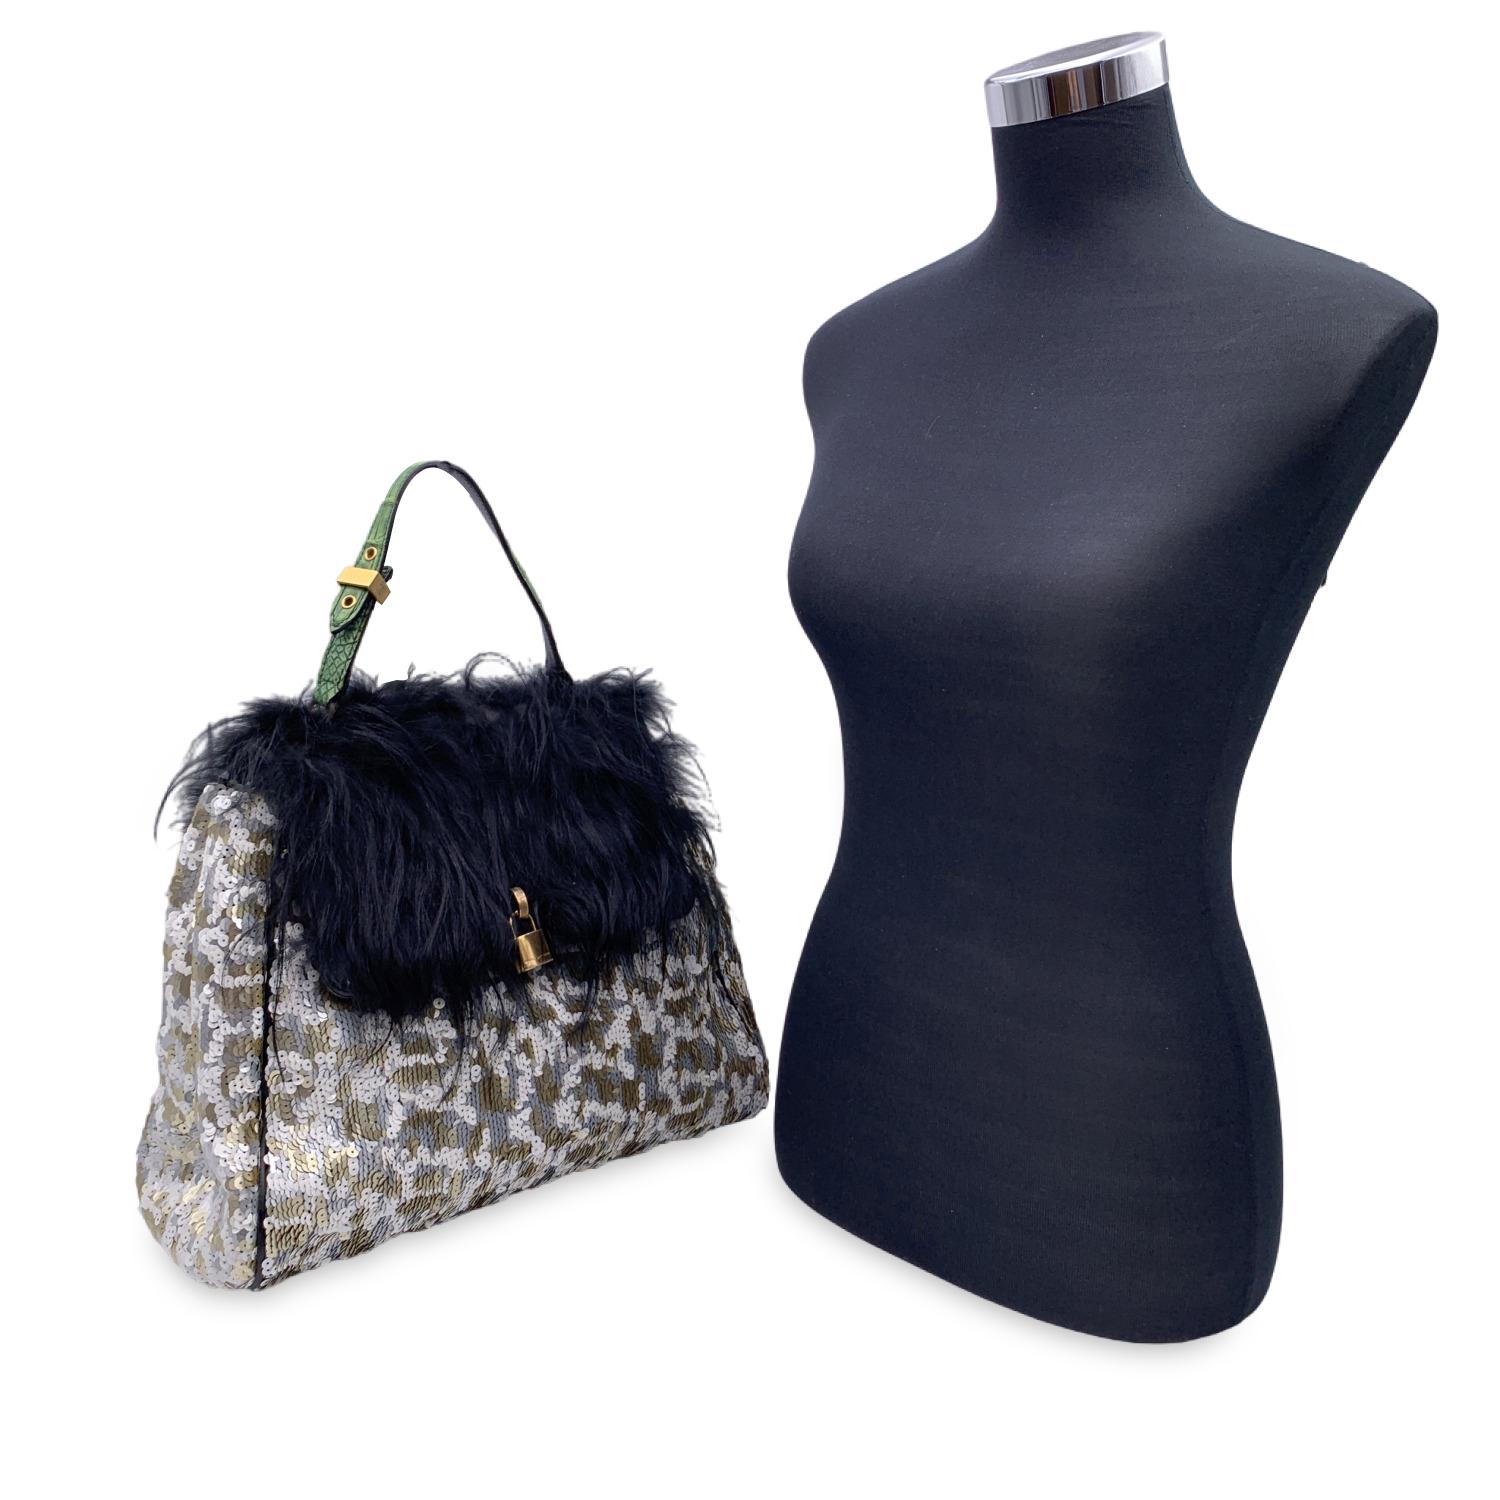 Beautiful Marc Jacobs 'Gilda' Fur and Sequins flap bag from the 2010 collection. Gold metal mock padlock detailing on the front. Flap with double magnetic button closure and push lock closure. Green leather top handles. Black leather lining. 1 side